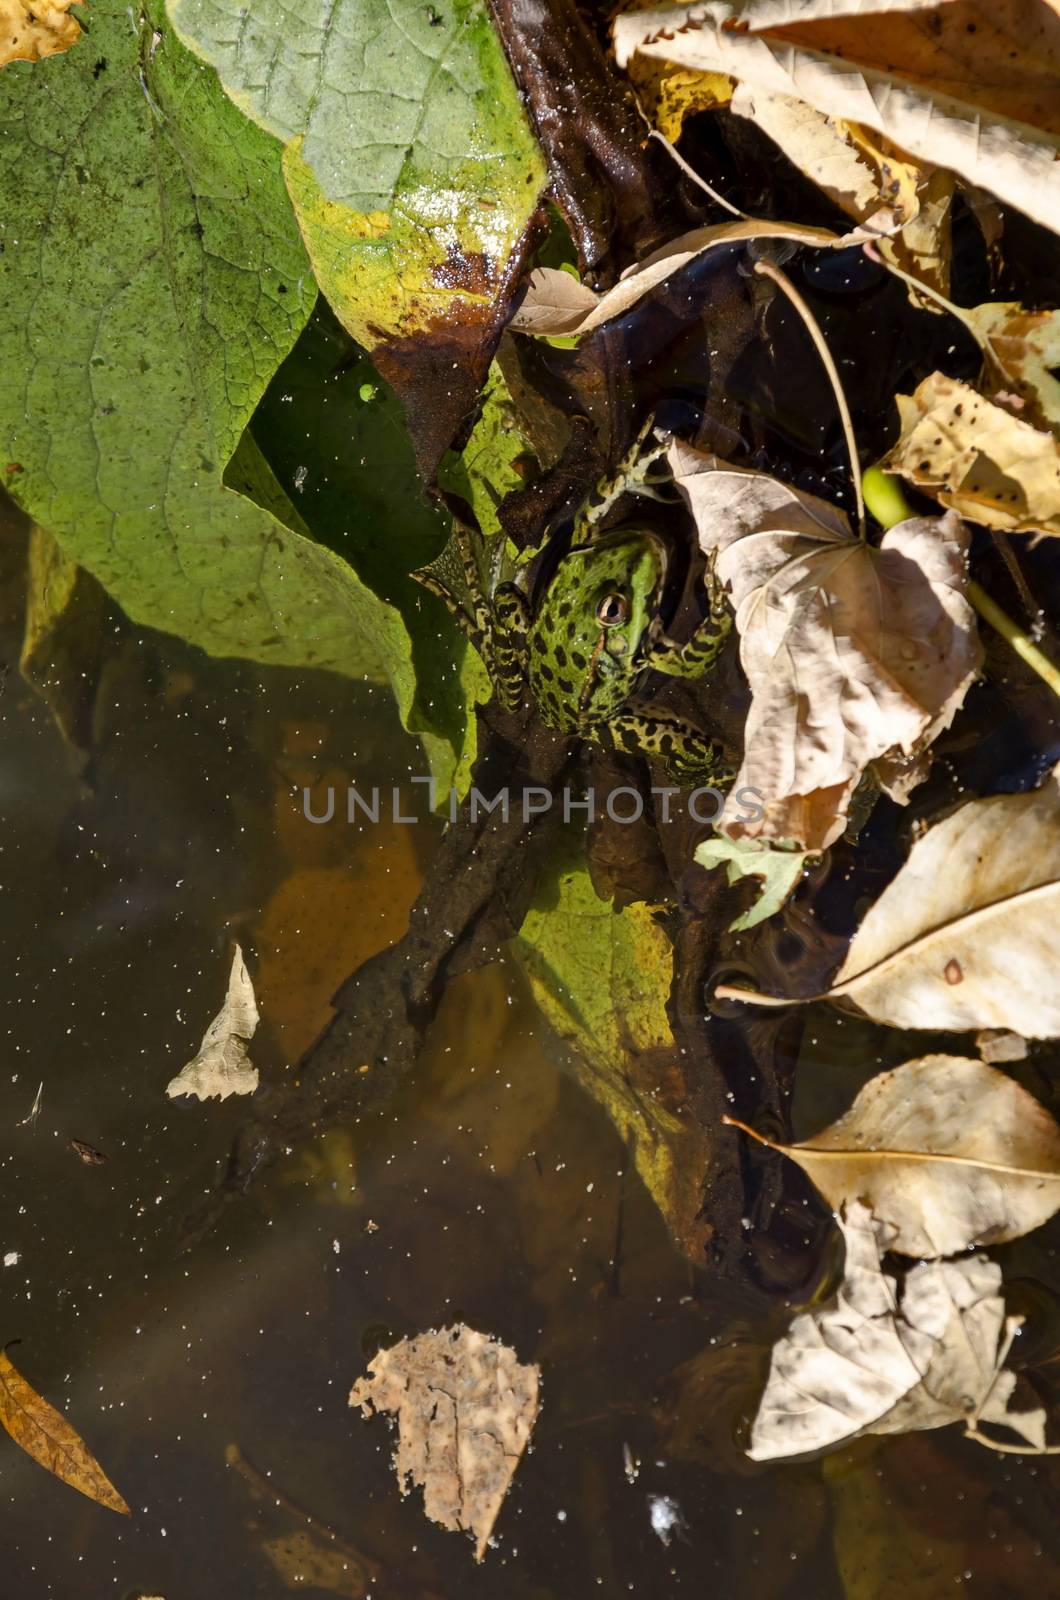 Lake with colorful autumn leaves and a green frog or Rana in the water, Vrana park by vili45